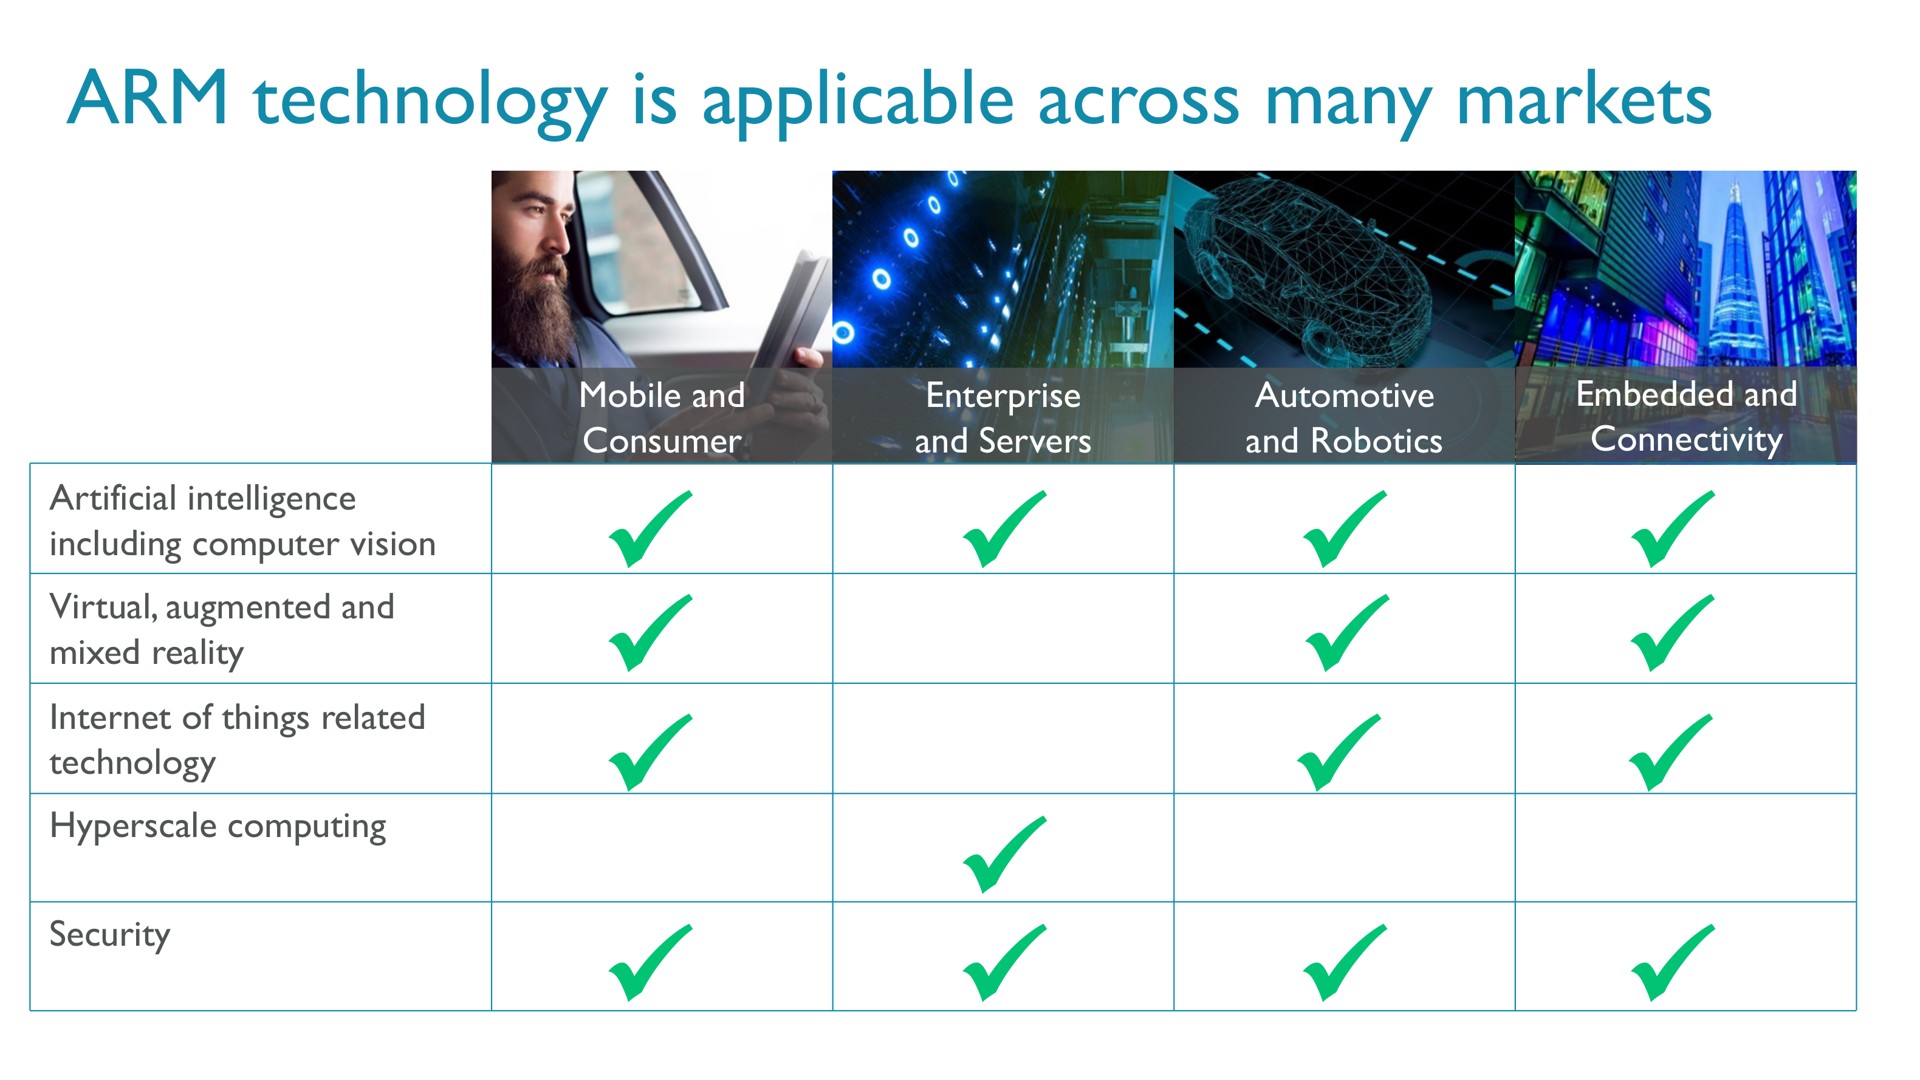 arm technology is applicable across many markets a a | SoftBank